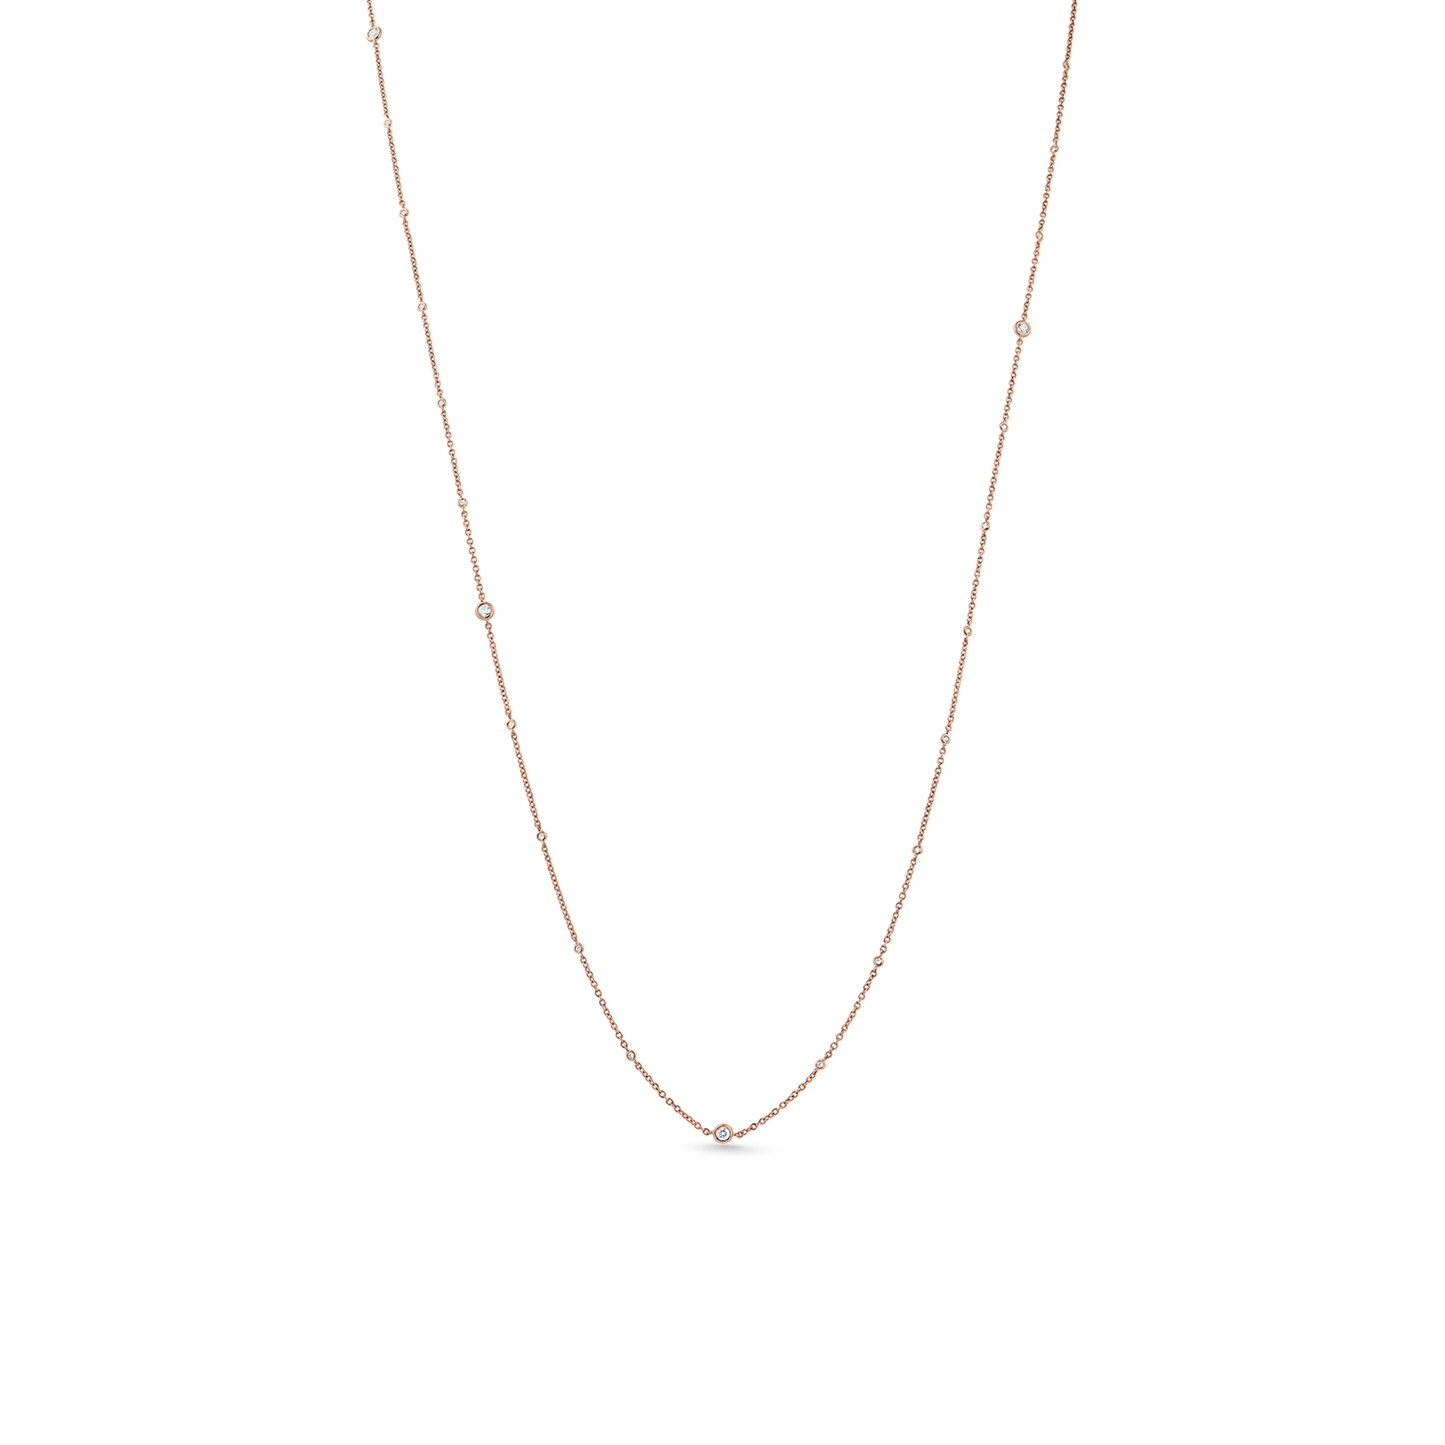 Oliver Heemeyer Star Light diamond necklace mixed 89,0 cm 0.40 ct. made of 18k rose gold.